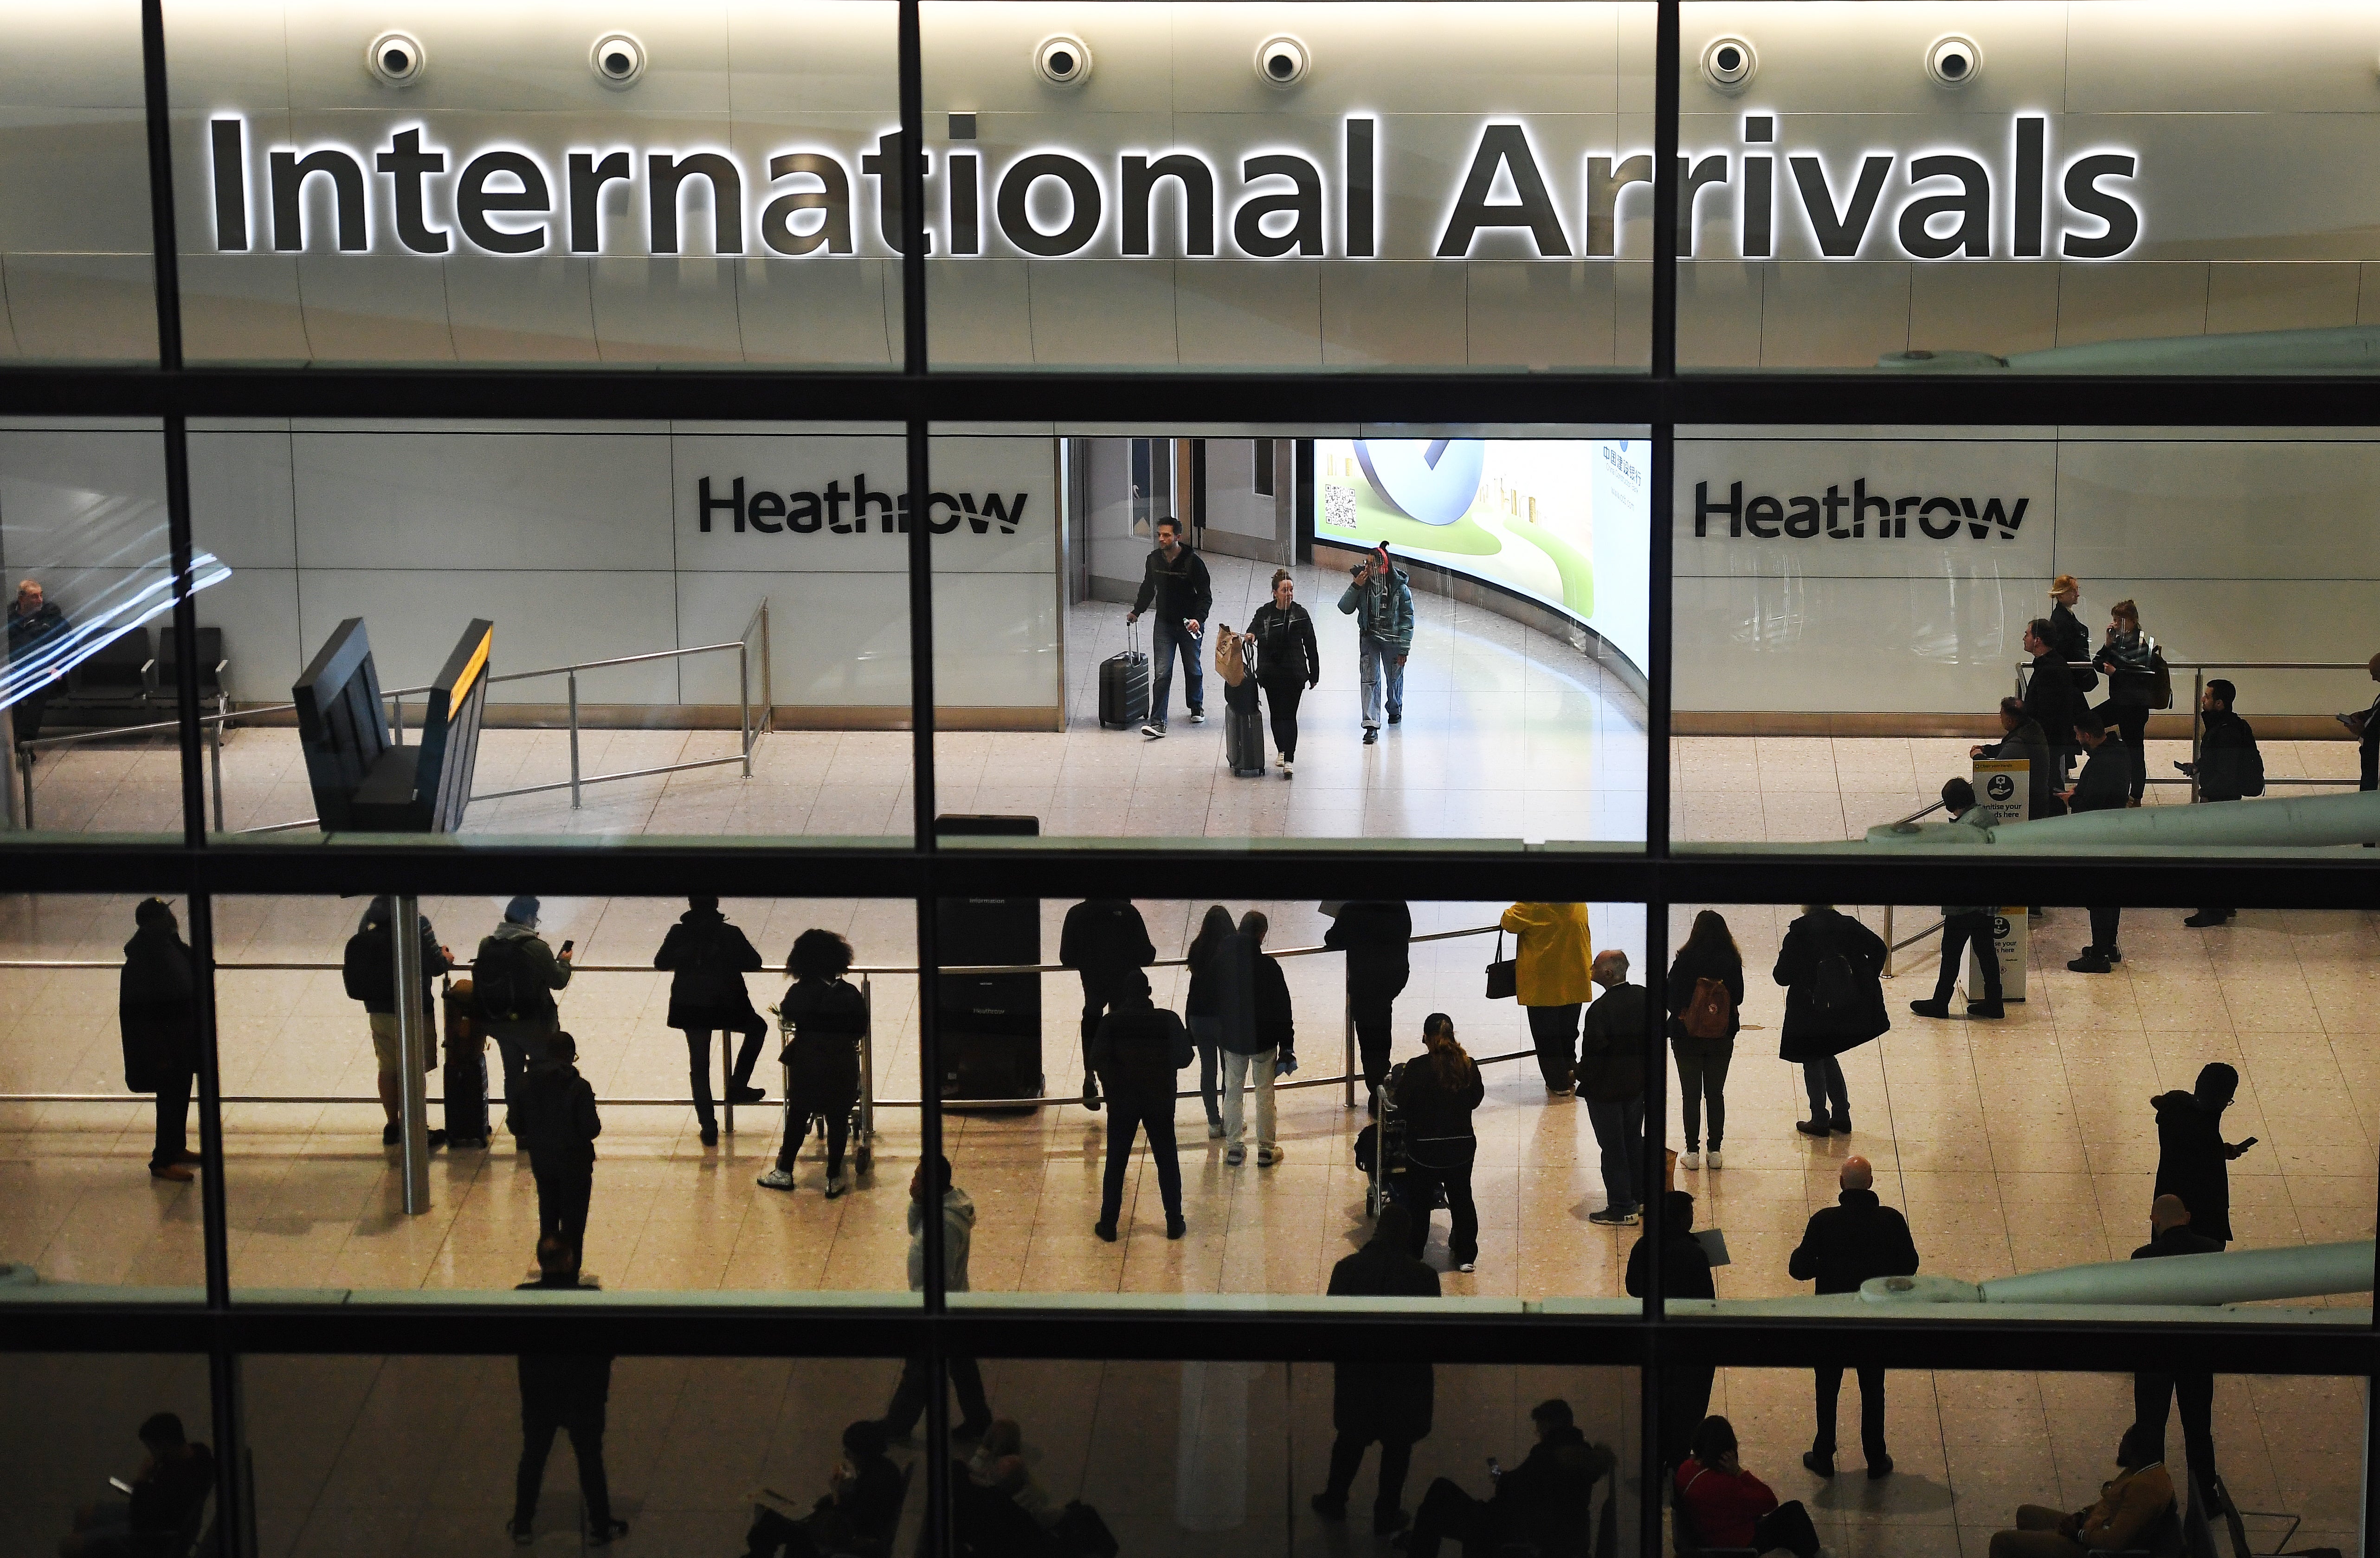 With travel curtailed by Covid, Heathrow Airport had tumbled down the list